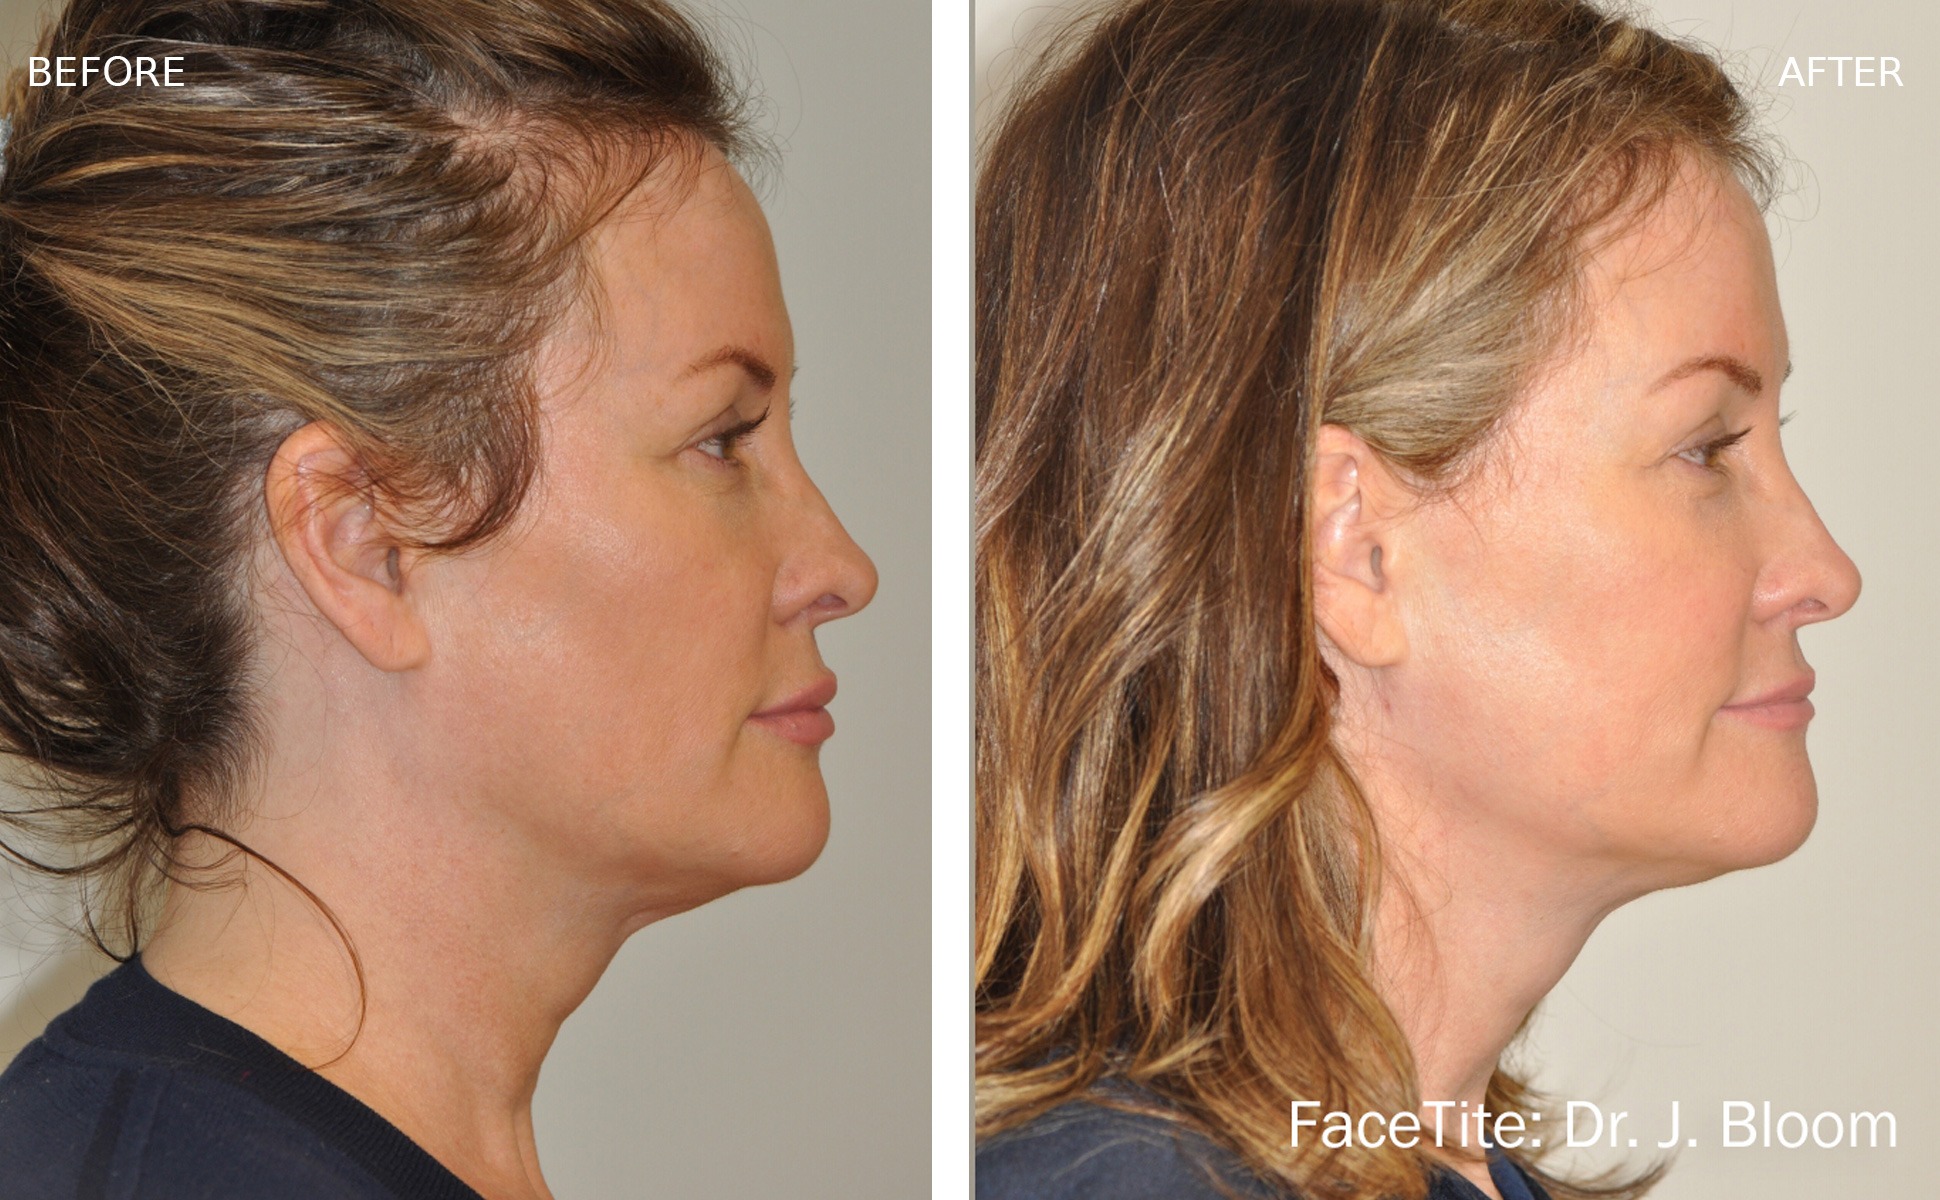 Face Tite pic5 - FaceTite Before after